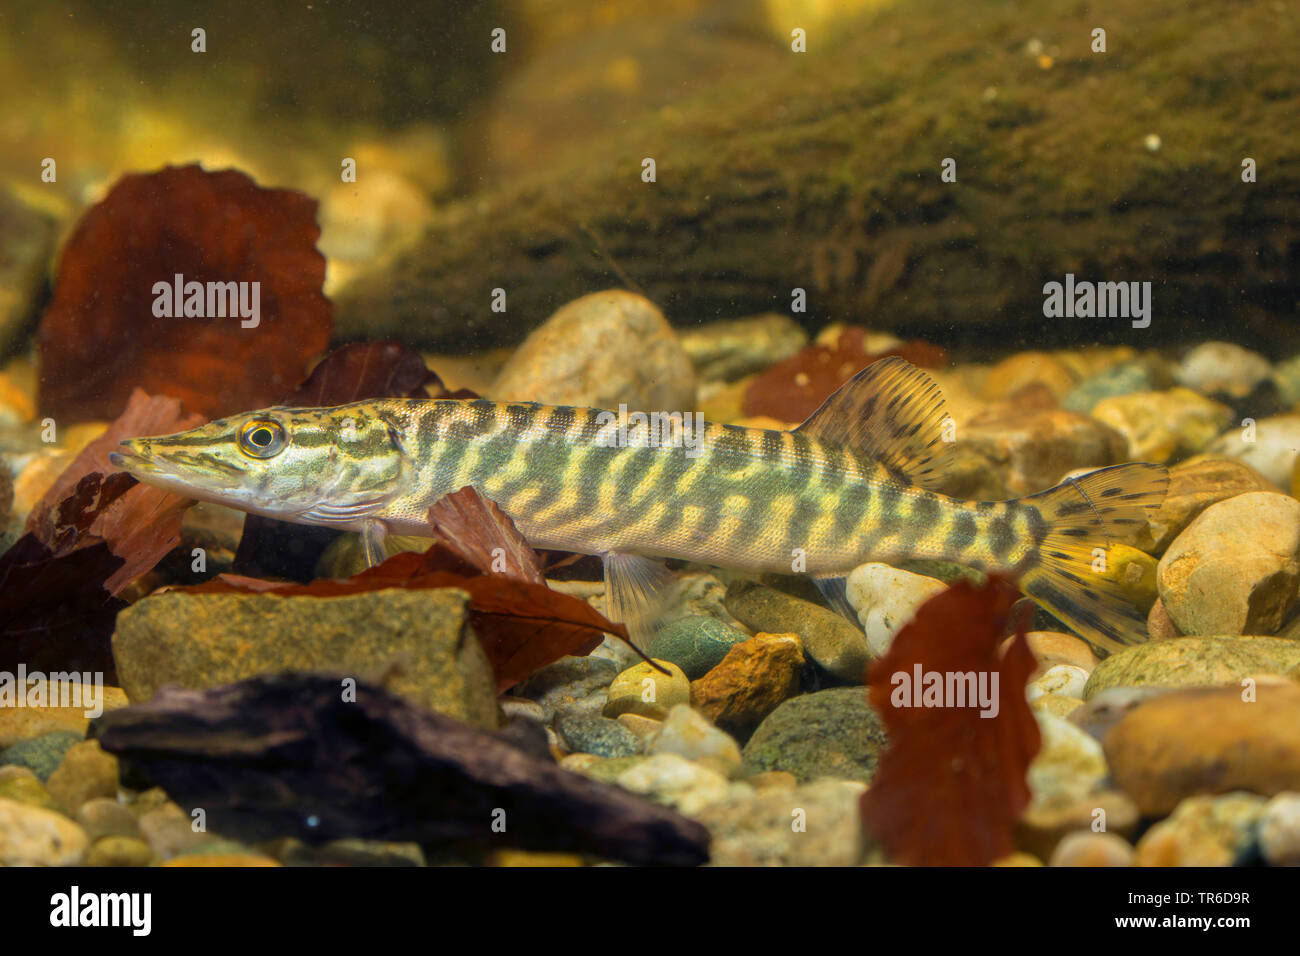 pike, northern pike (Esox lucius), swimming juvenile pike, side view, Germany Stock Photo